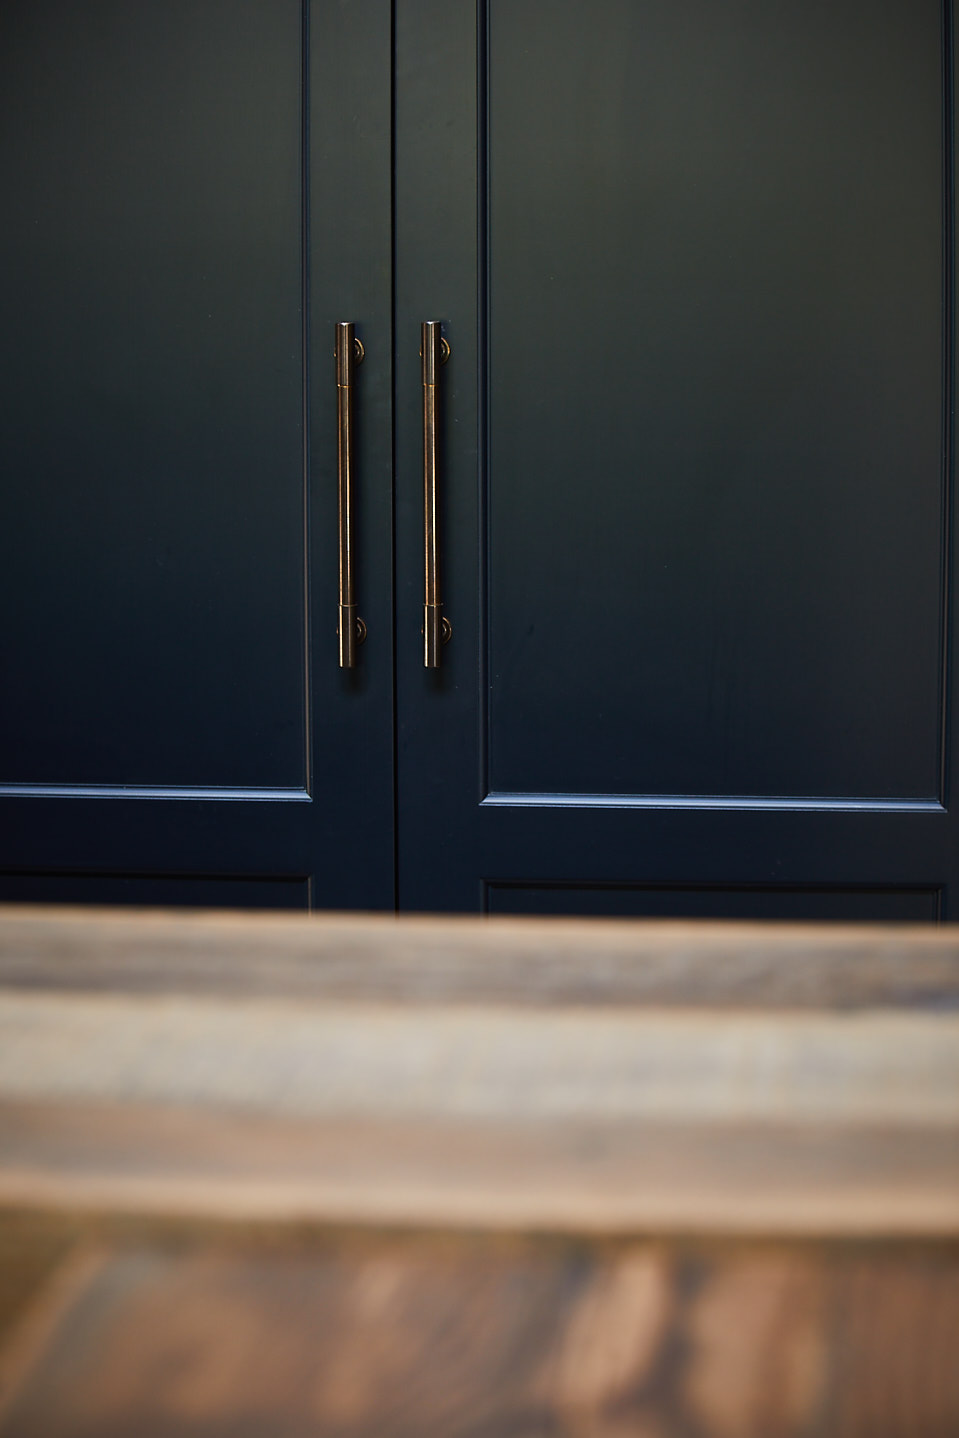 Deep blue kitchen cabinets with aged brass pull handles